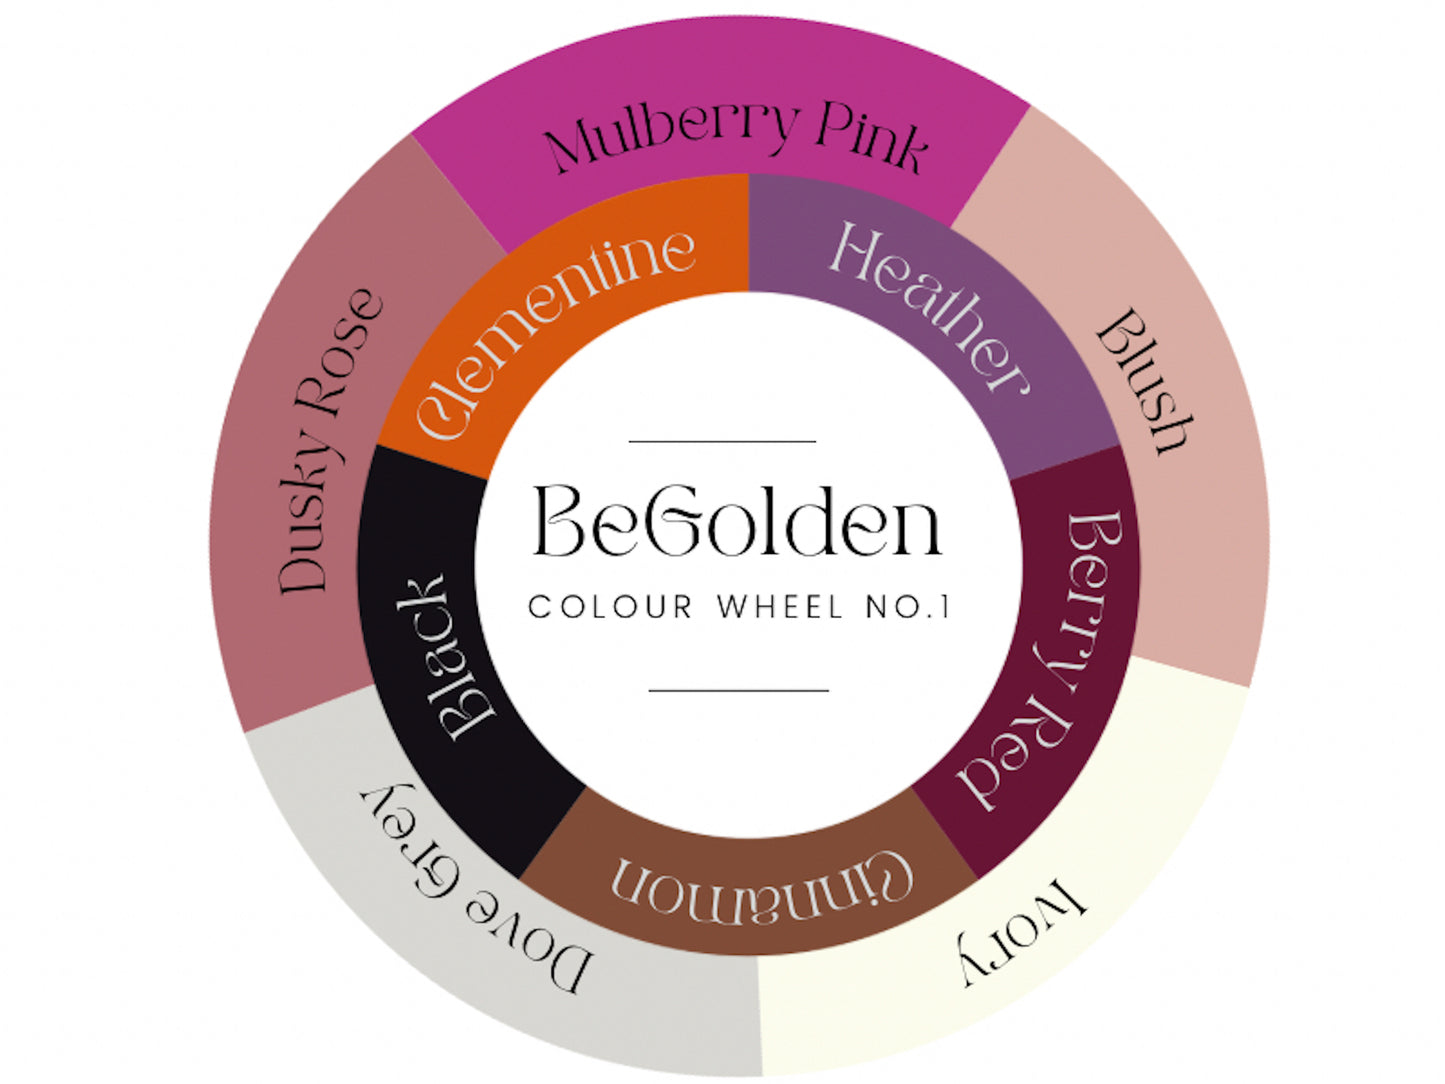 a colour wheel shows all the leather colours that are available in the family album. The colours here are pink, brown, orange and purple